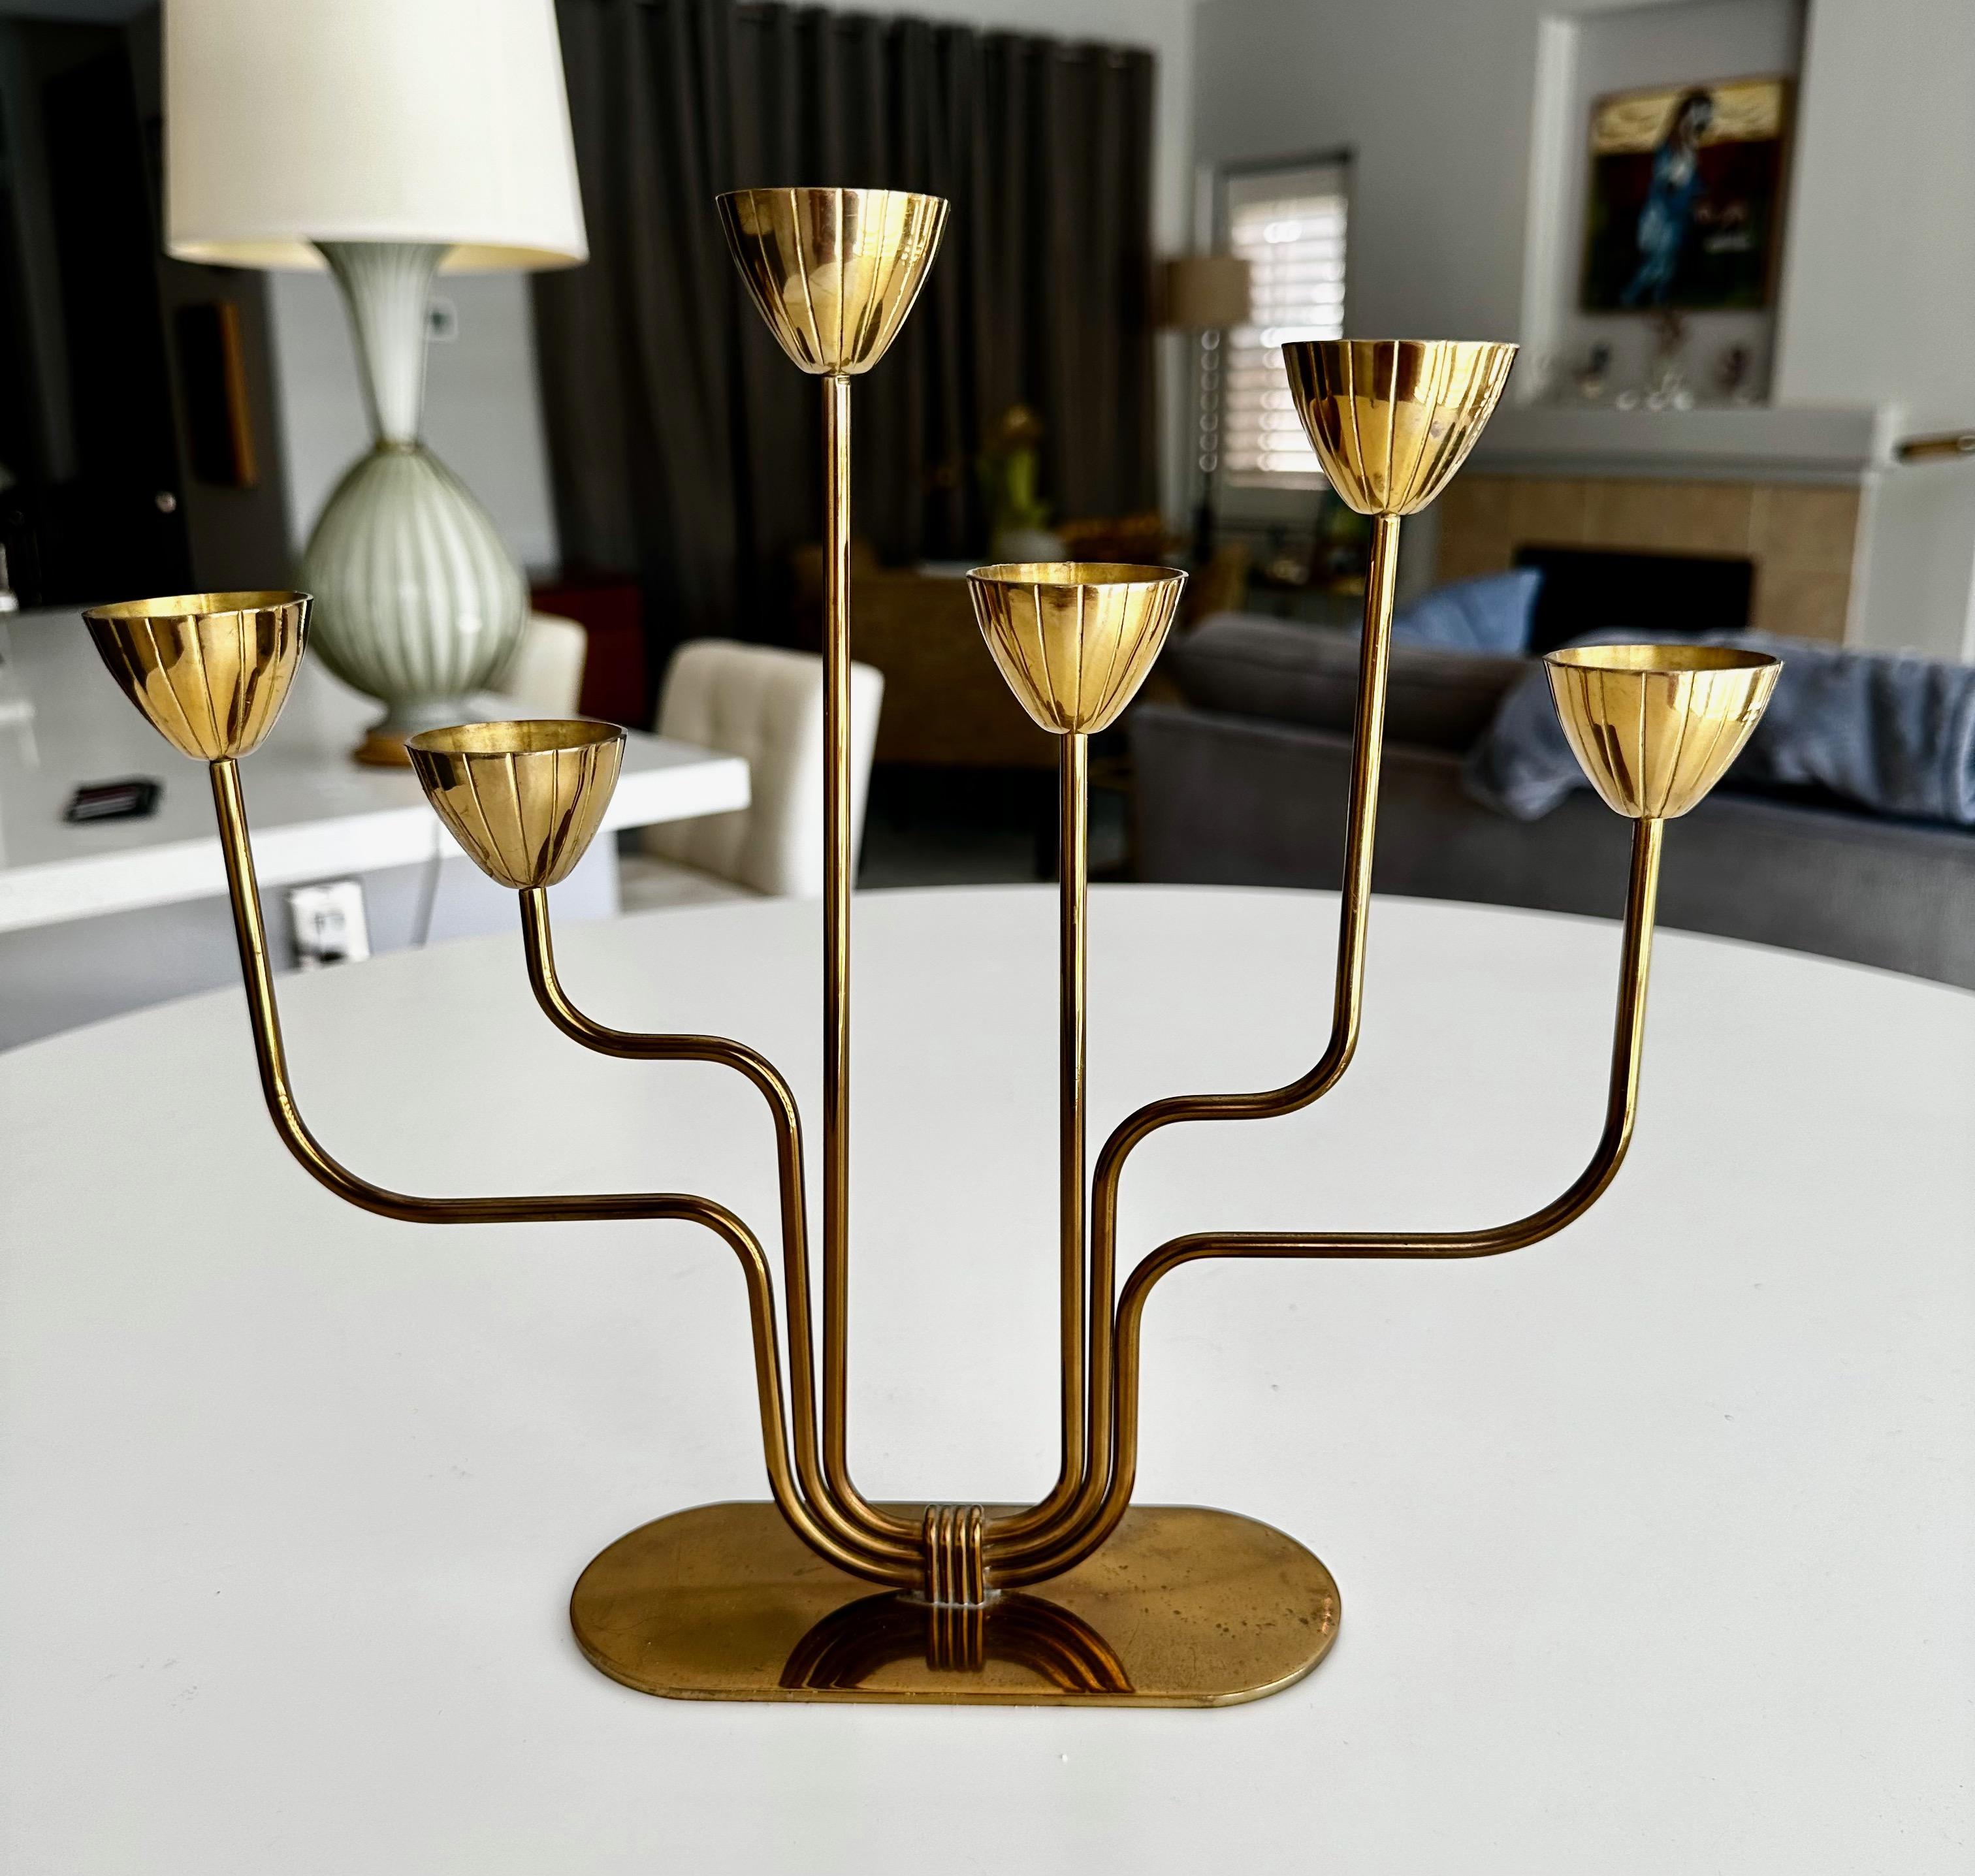 Single 6 arm brass candlestick designed by Gunnar Ander. Produced by Ystad Metall in Sweden.